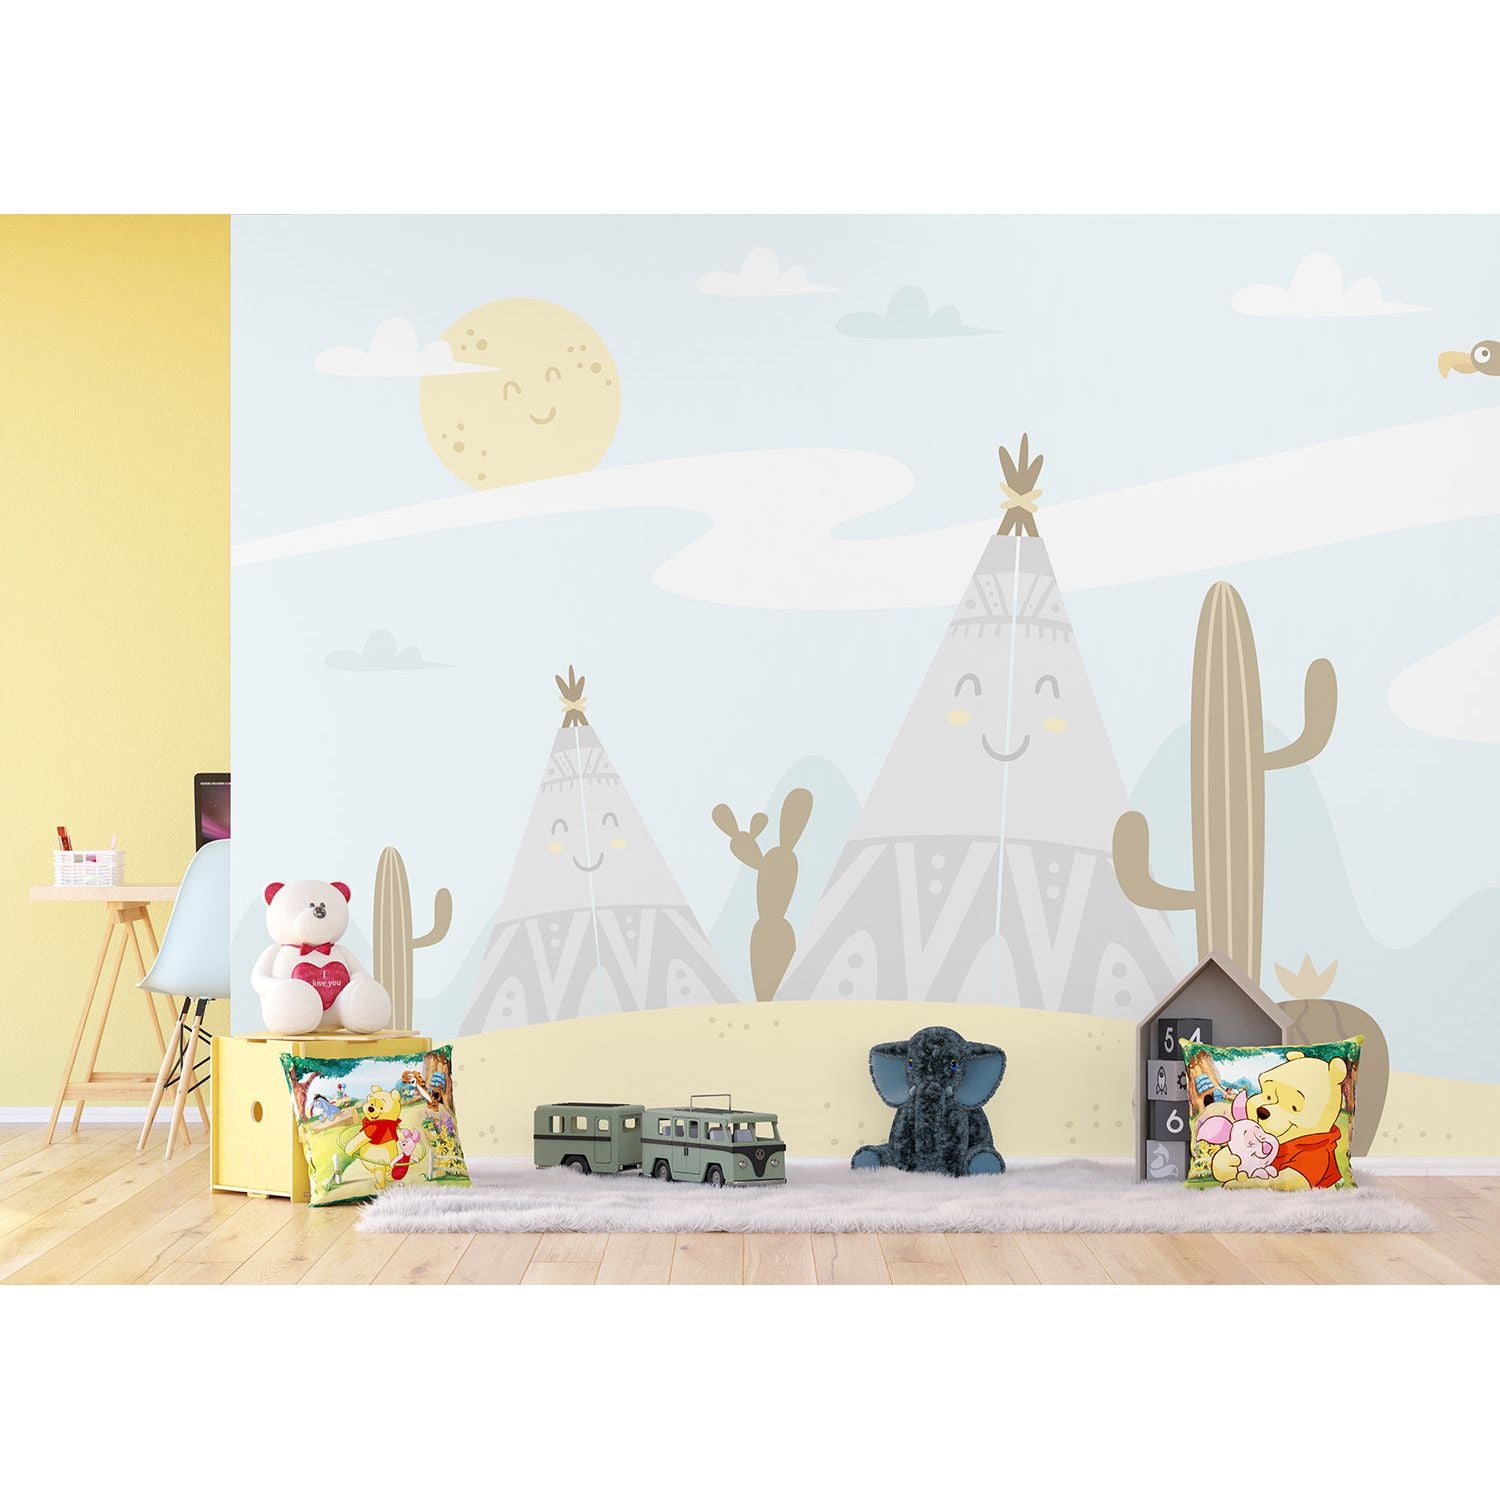 Happy Campers: Tent and Cactus Children's Wall Mural